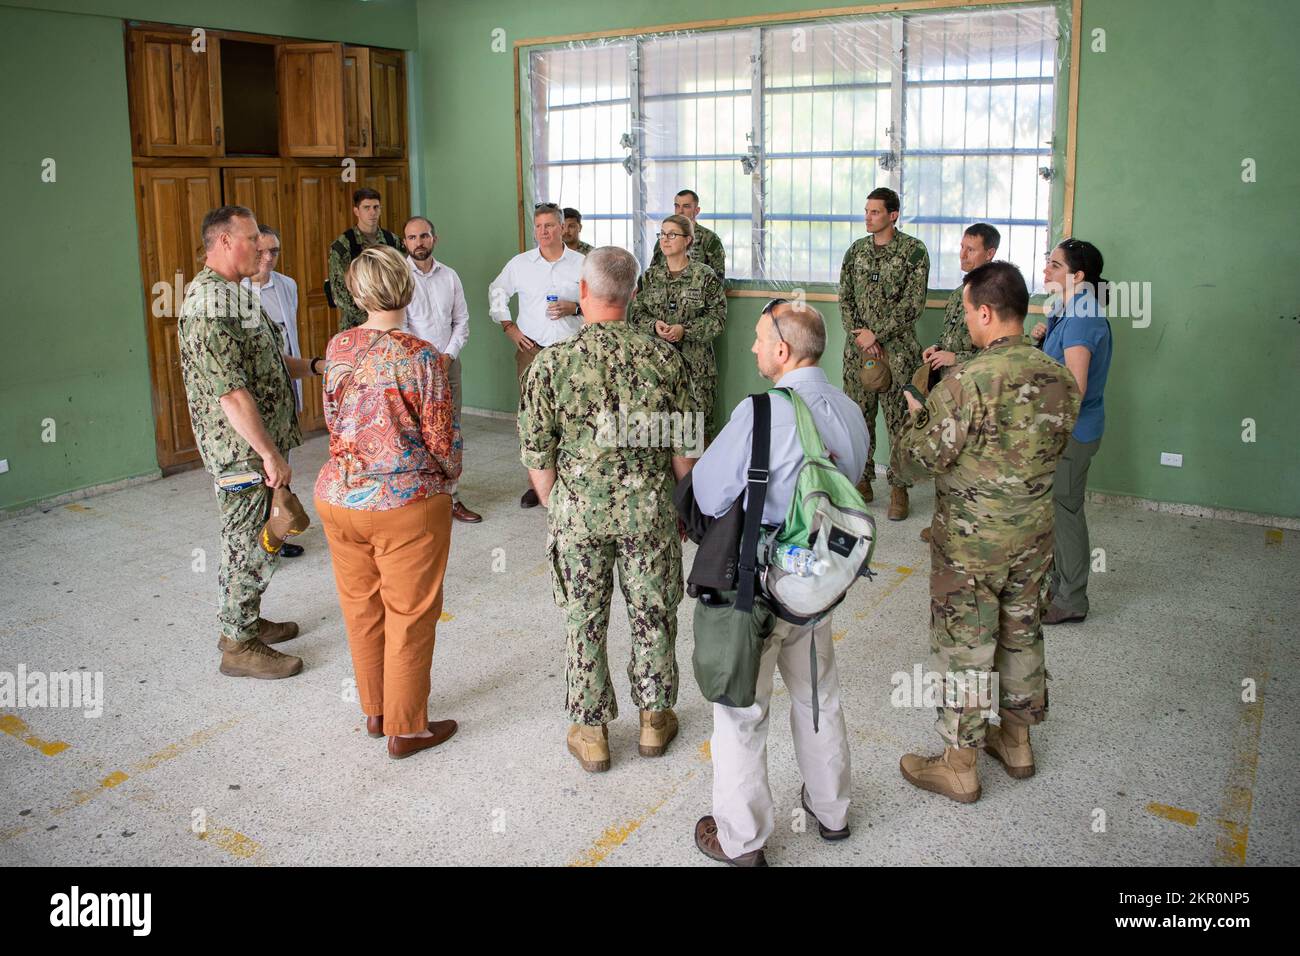 221105-N-TR141-1265 PUERTO CORTES, Honduras (Nov. 5, 2022) U.S. Embassy to Honduras officials, U.S. Navy leadership, and Honduran military and government officials, tour a medical site during Continuing Promise 2022 in Puerto Cortes, Honduras, Nov. 5, 2022. CP22 is a humanitarian assistance and goodwill mission conducting direct medical care, expeditionary veterinary care, and subject matter expert exchanges with five partner nations in the Caribbean, Central and South America. Stock Photo